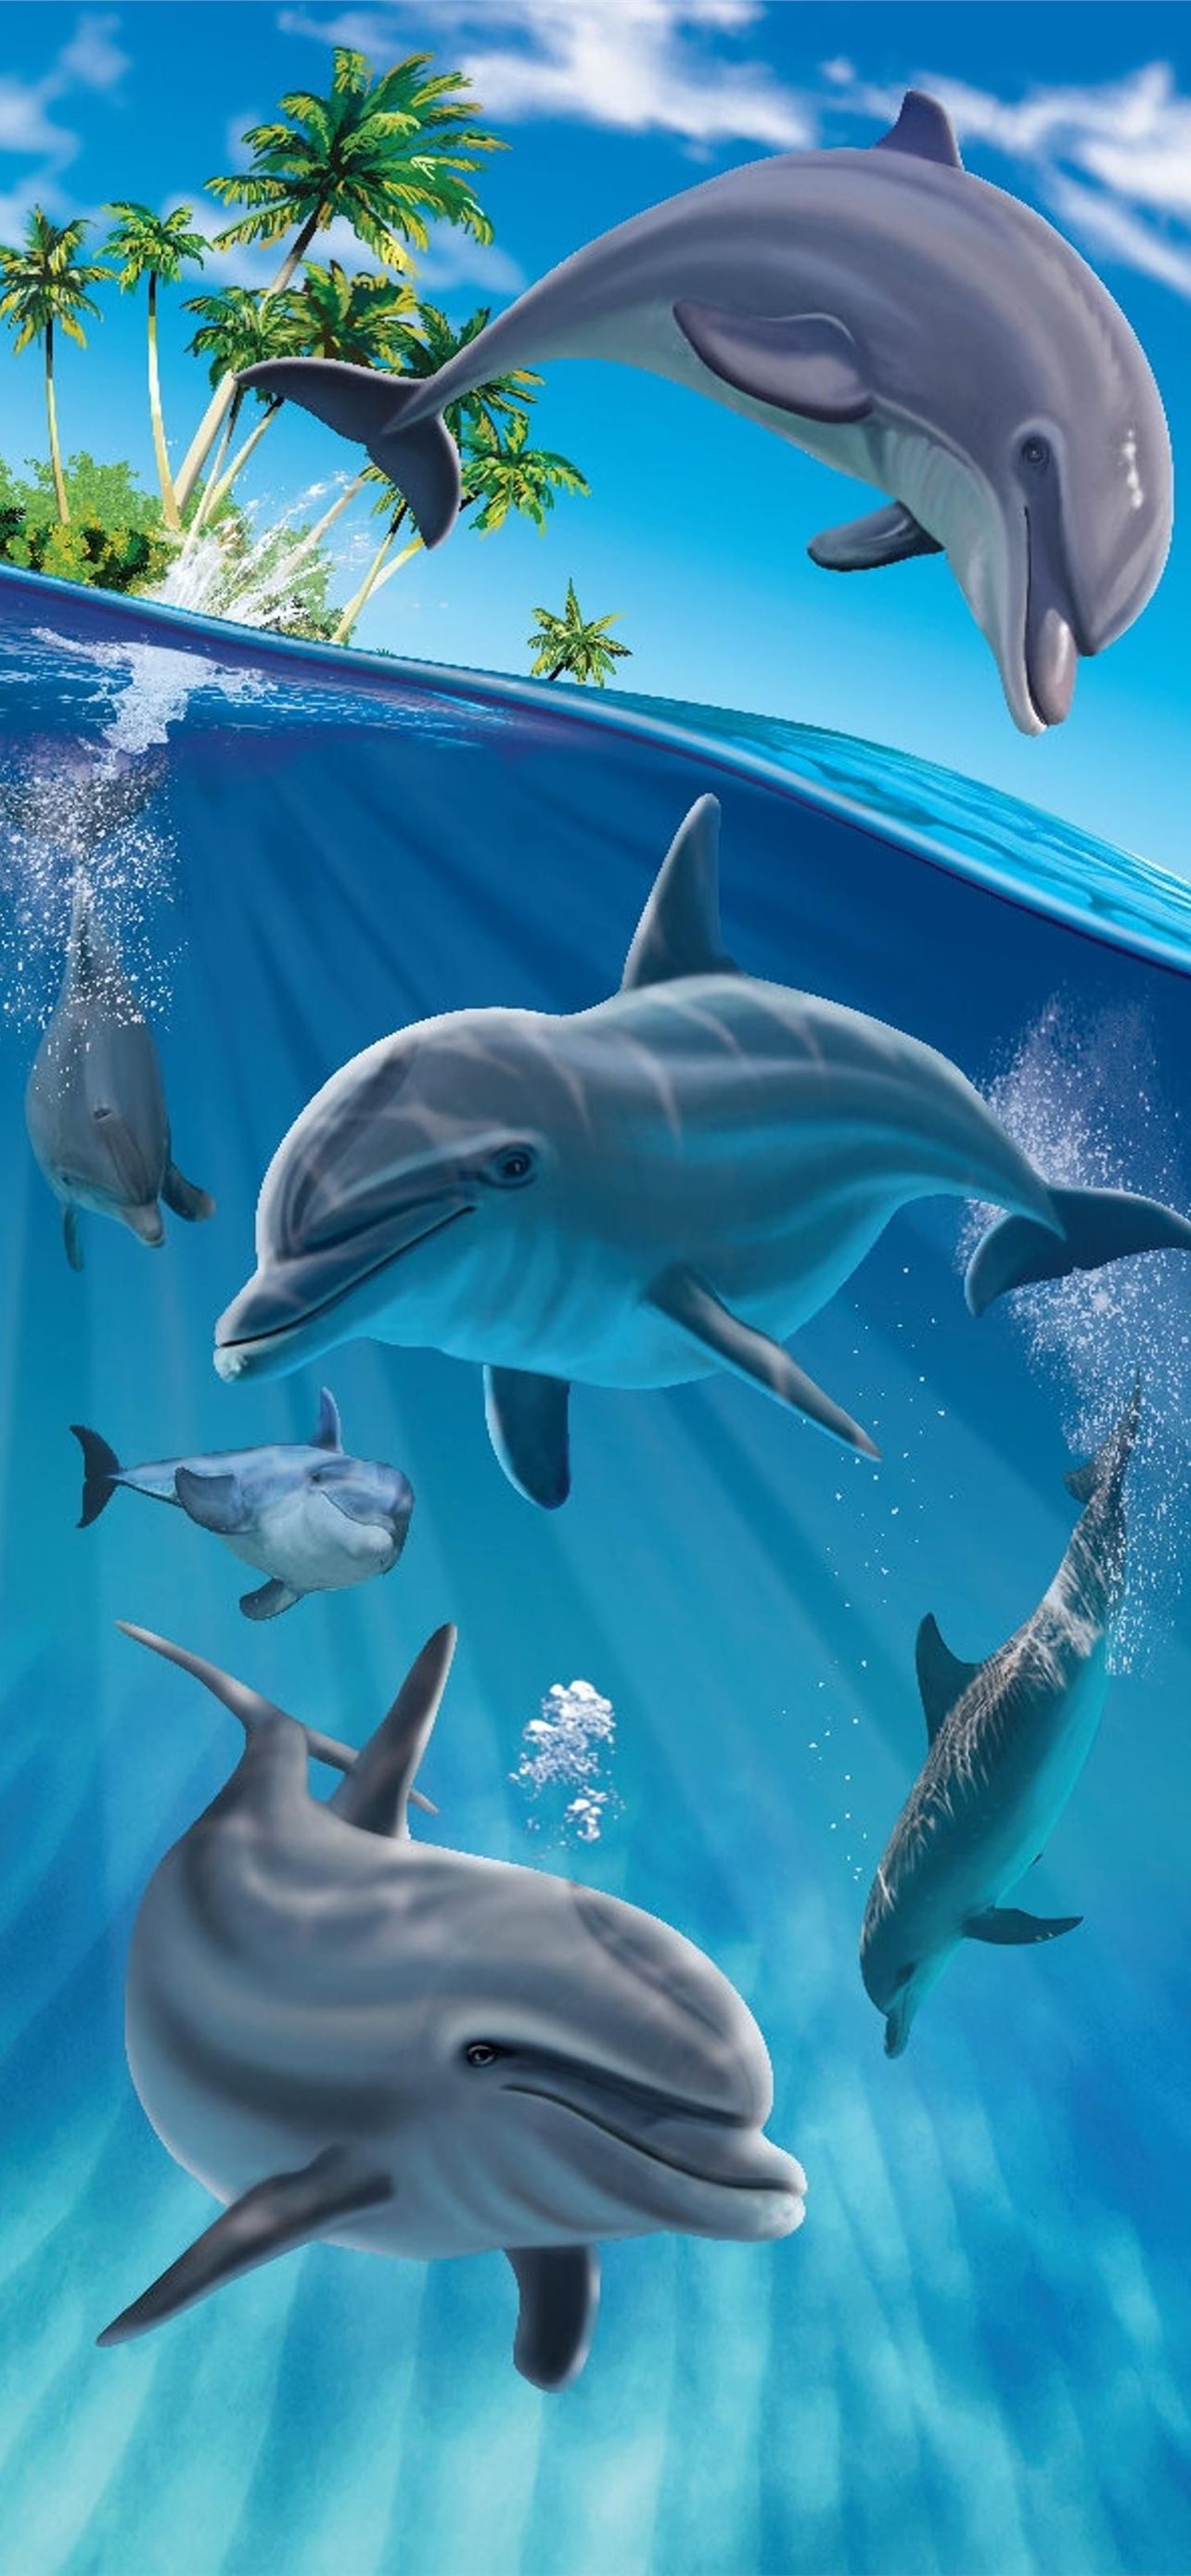 Dolphin Wallpaper 69 images